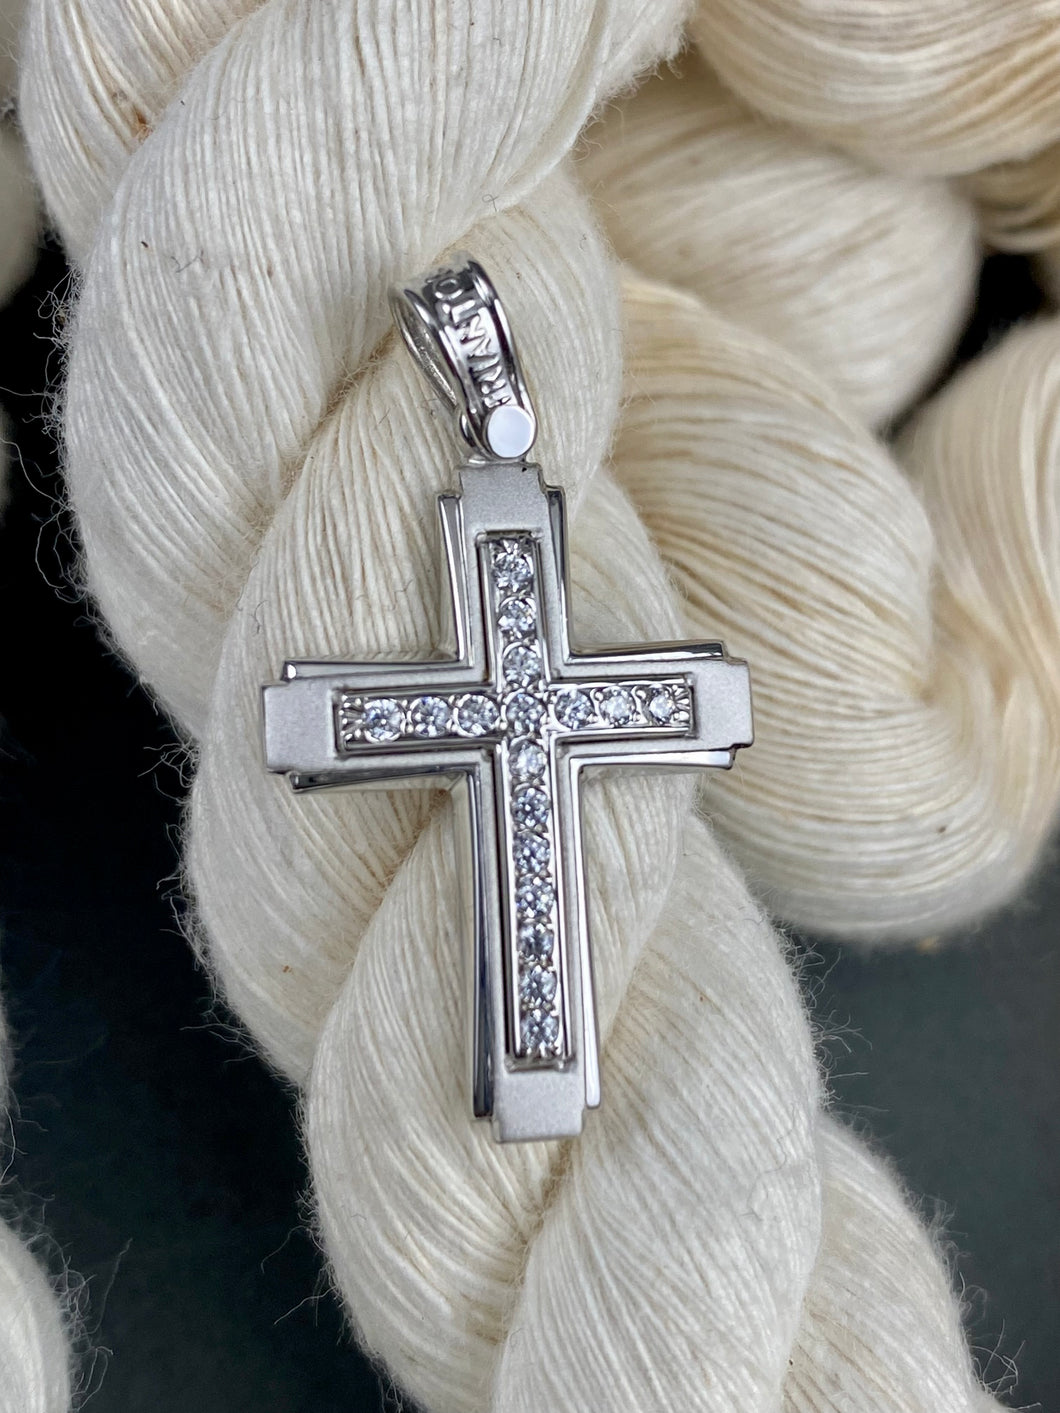 Triantos 14k  White Gold Cross Polished  and Brushed with Precious Stones 2.05g 222613